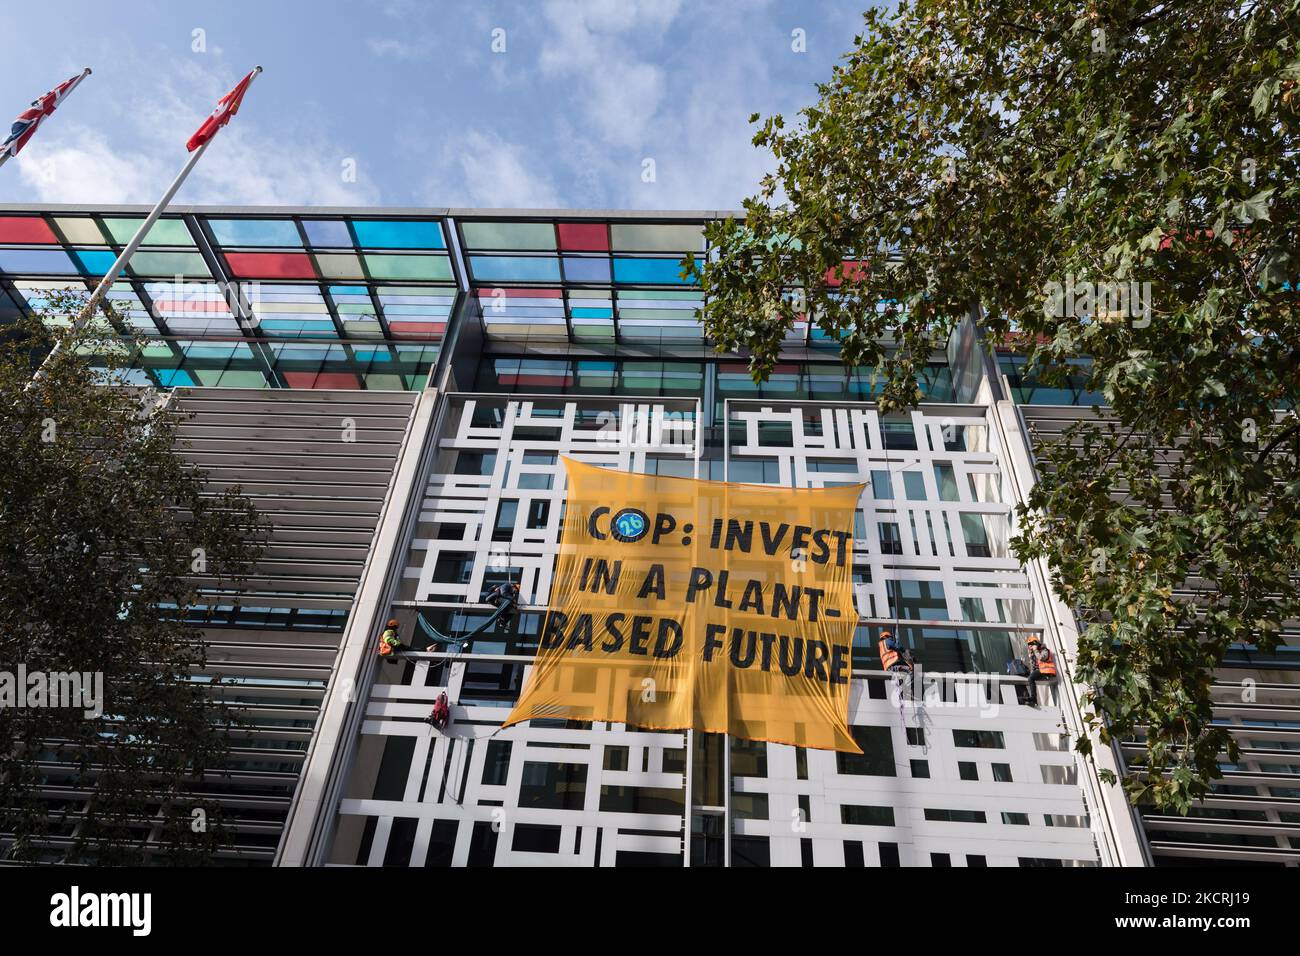 LONDON, UNITED KINGDOM - OCTOBER 26, 2021: Activists from Animal Rebellion scaled the outside of the building of the Department for Environment, Food and Rural Affairs (Defra) and dropped a banner calling on the UK Government to invest in transition to a plant-based food system in the run-up to the COP26 UN Climate Change Conference in Glasgow, which begins on Sunday, on October 26, 2021 in London, England. (Photo by WIktor Szymanowicz/NurPhoto) Stock Photo